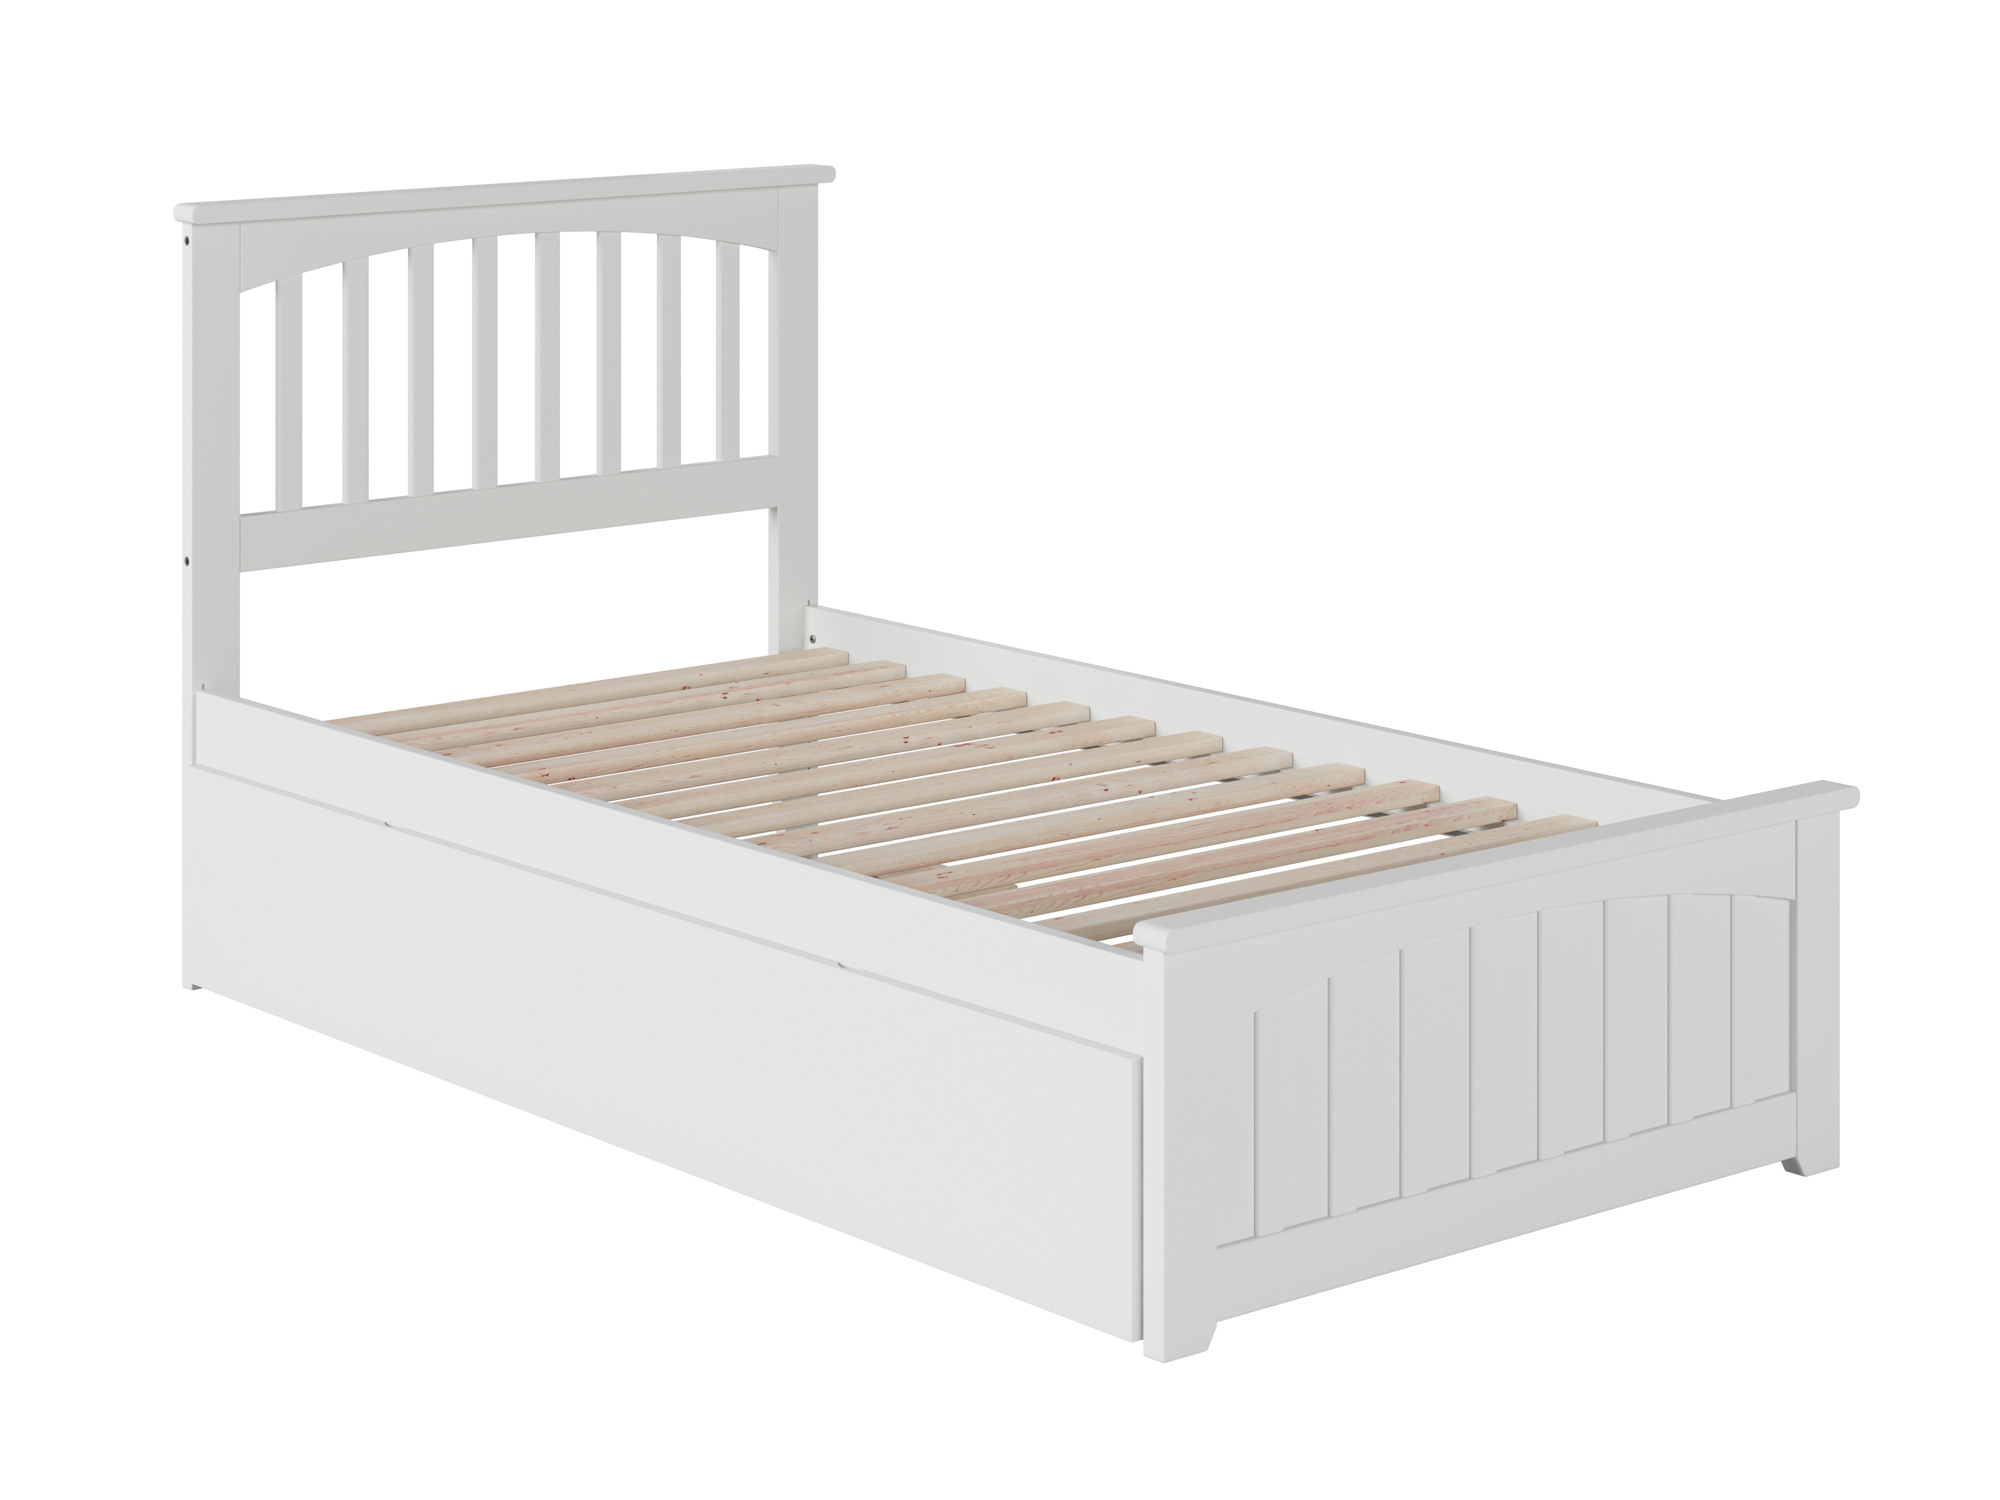 Mission Twin Extra Long Bed with Matching Footboard and Twin Extra Long Trundle in White - image 1 of 7